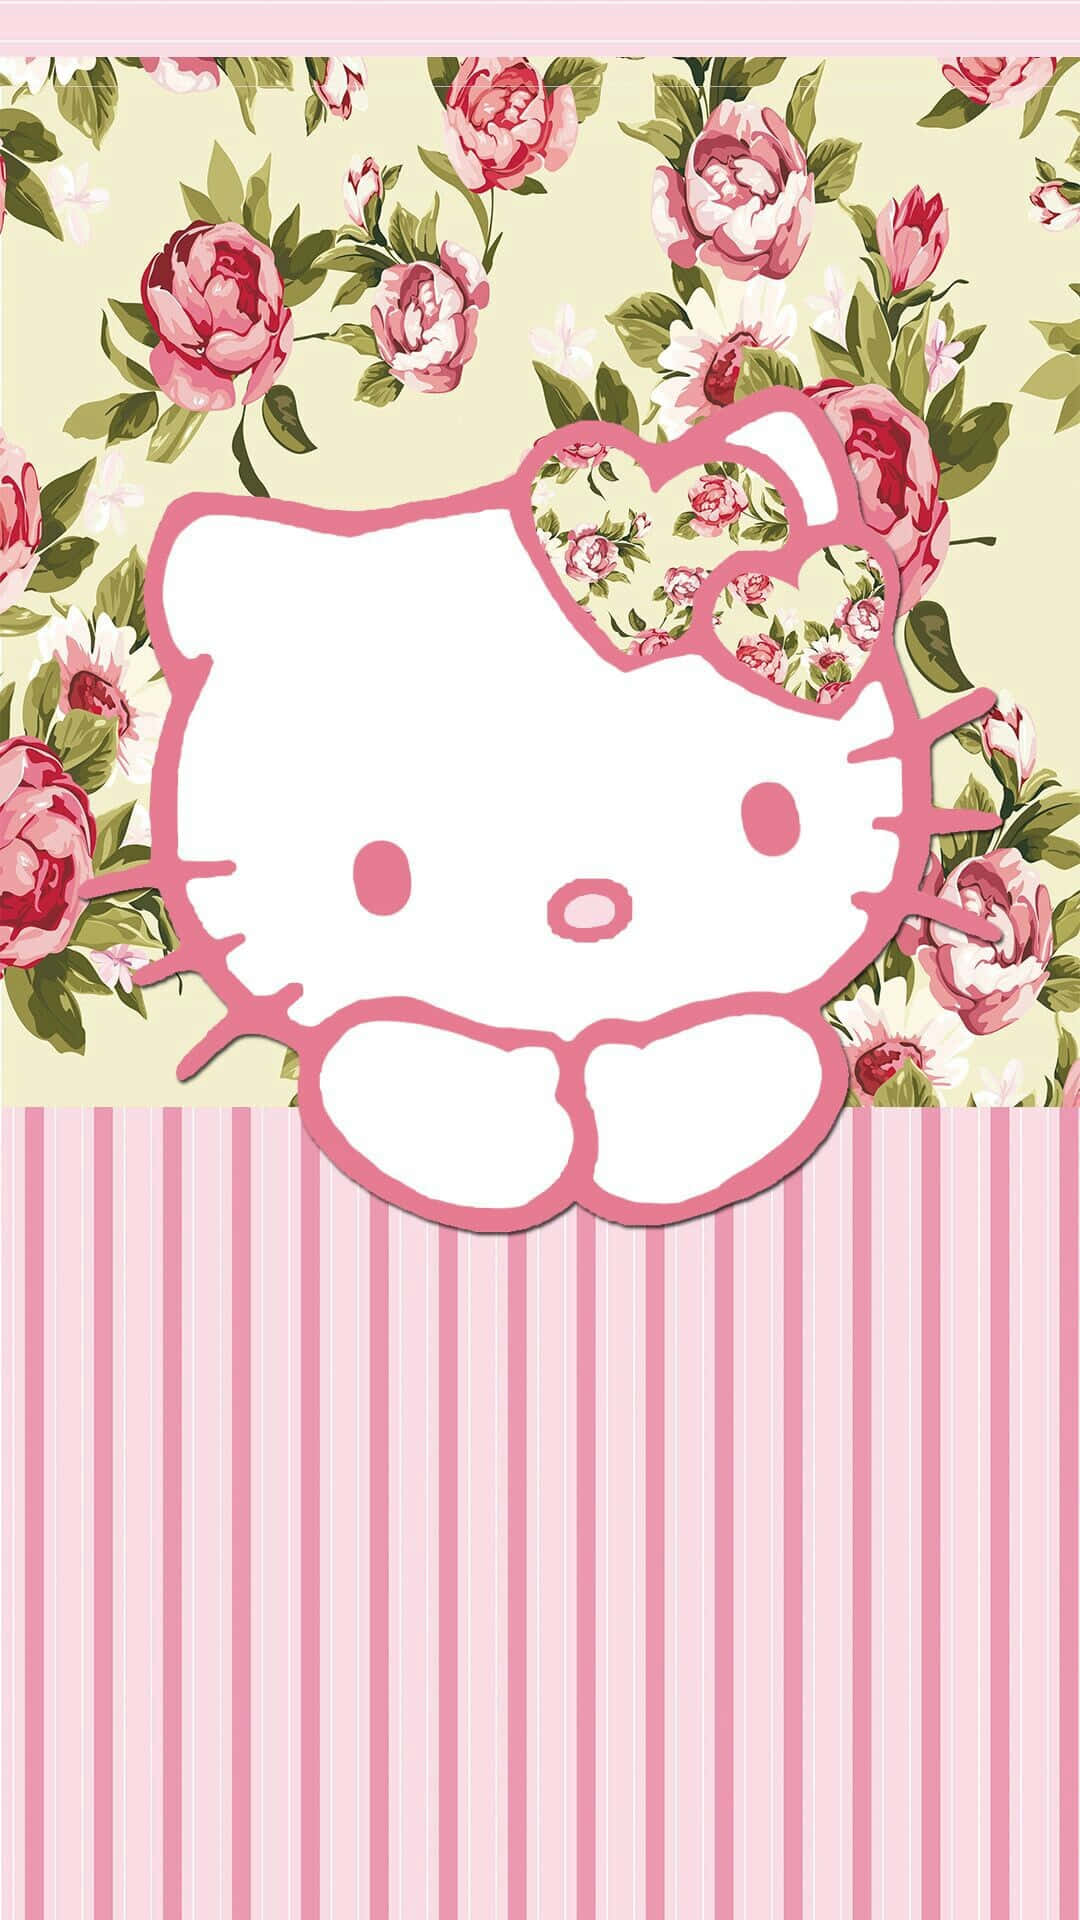 Hello Kitty Floral Background Wallpaper